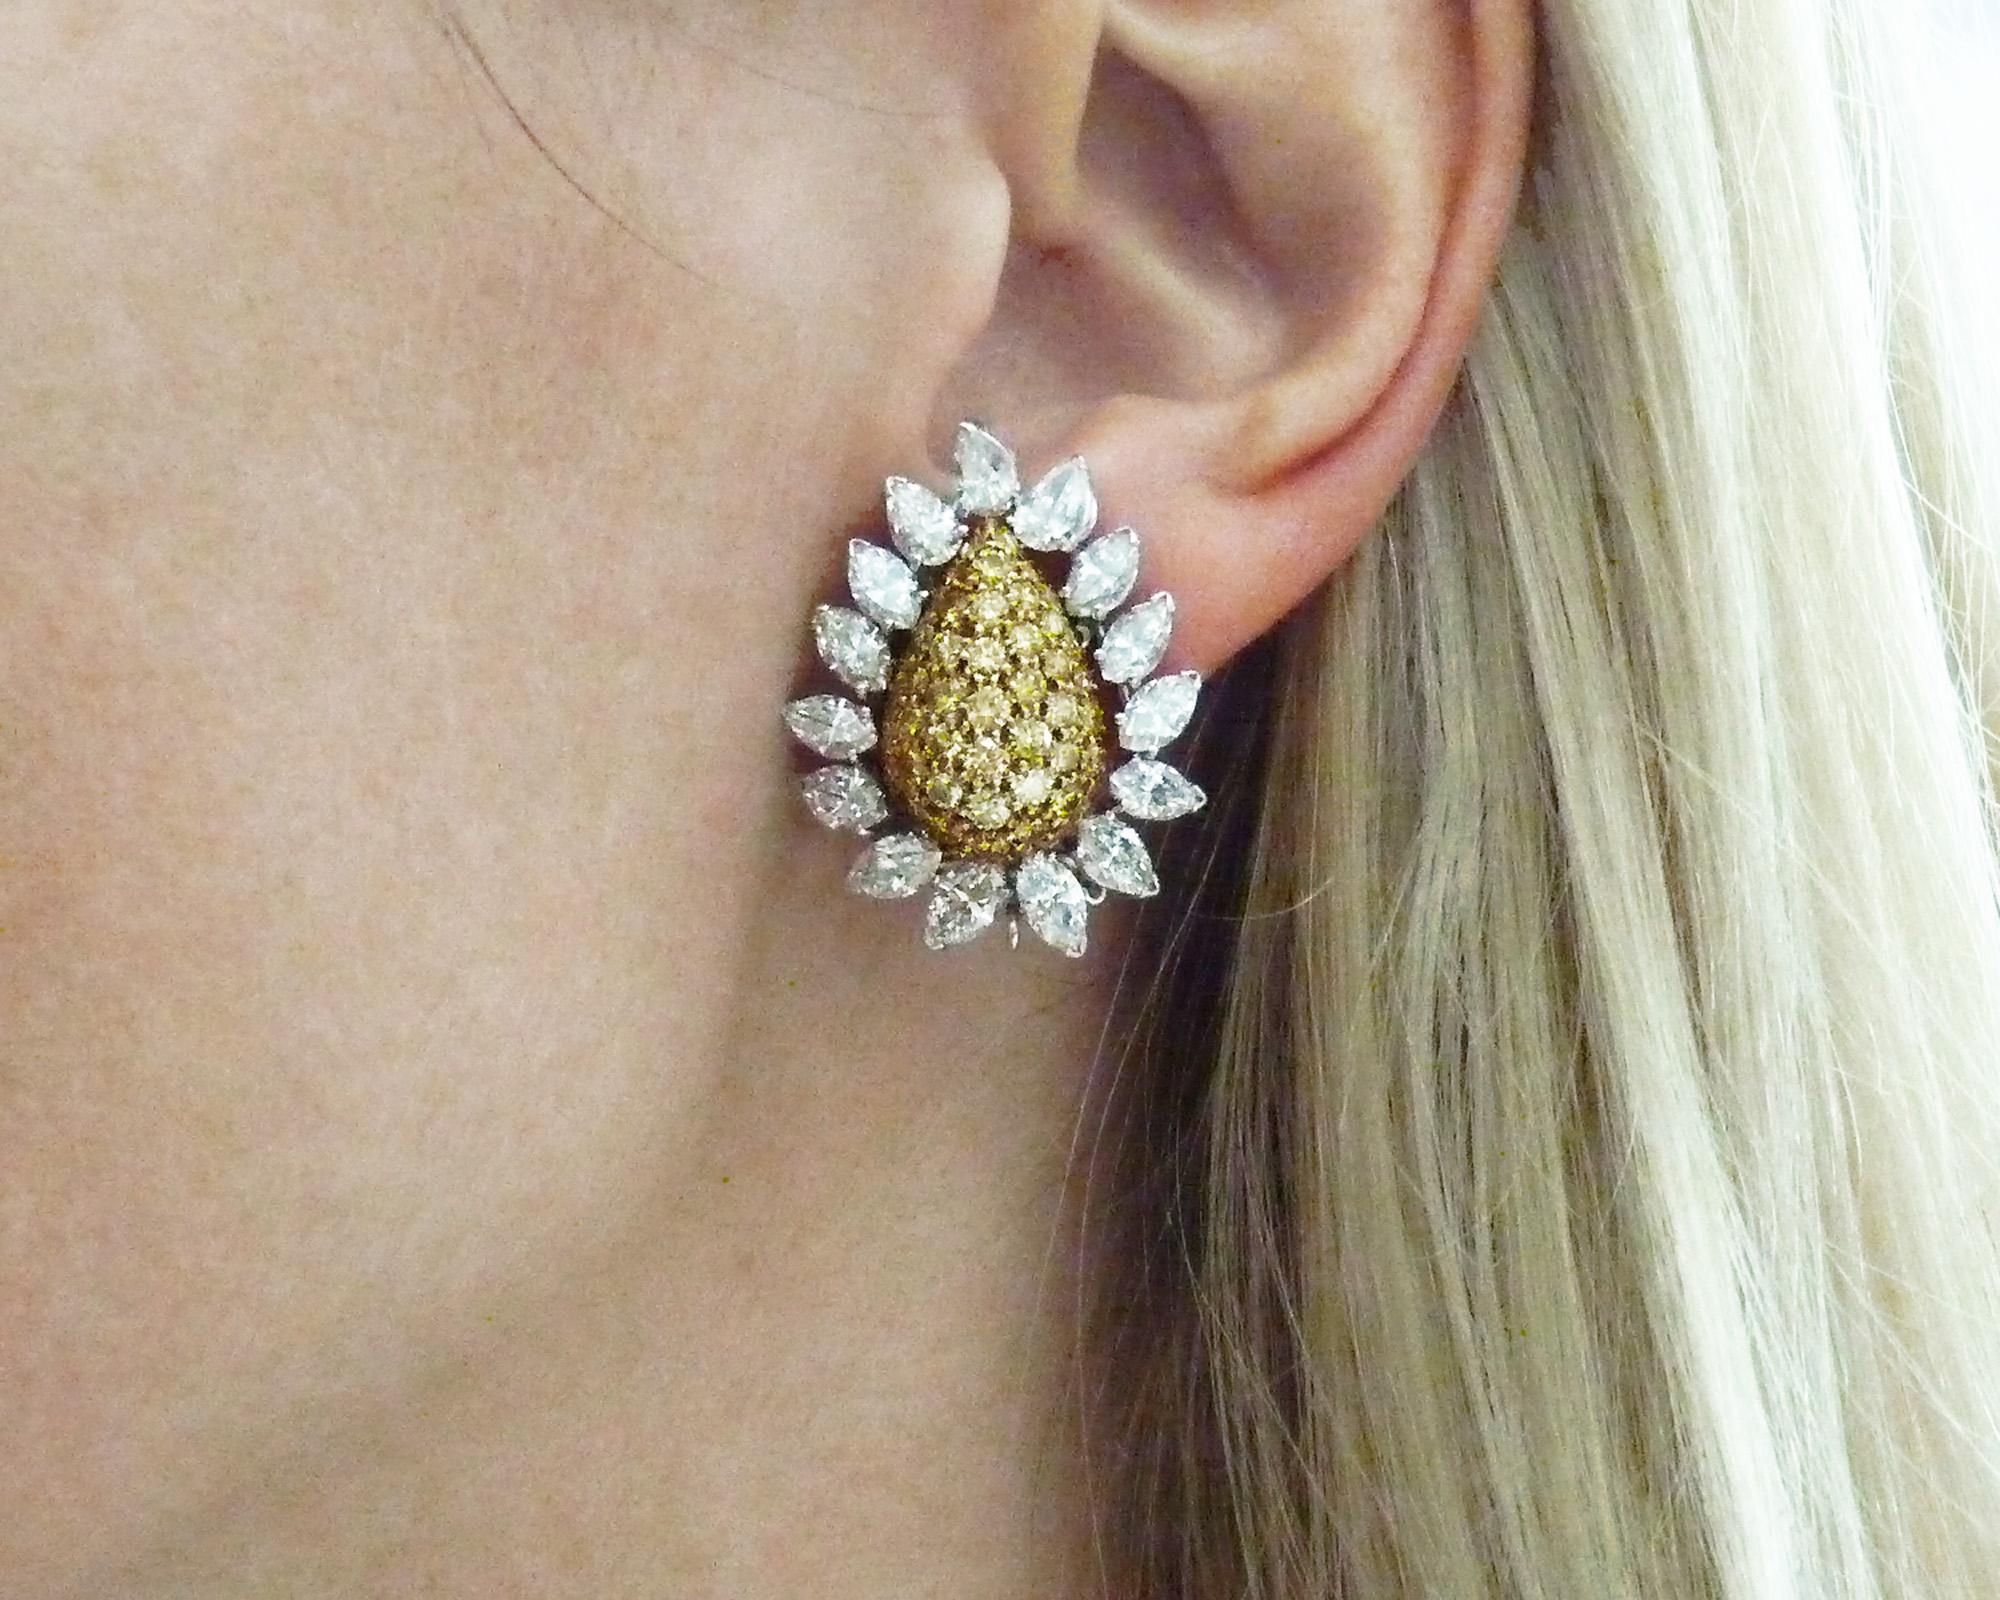 This pair of signed Van Cleef & Arpels Yellow and White Diamond Flower Earrings, made in France in the Contemporary era, 21st century, are crafted in platinum and 18K yellow gold, and feature pave-set yellow diamonds with an estimated weight of 6.00